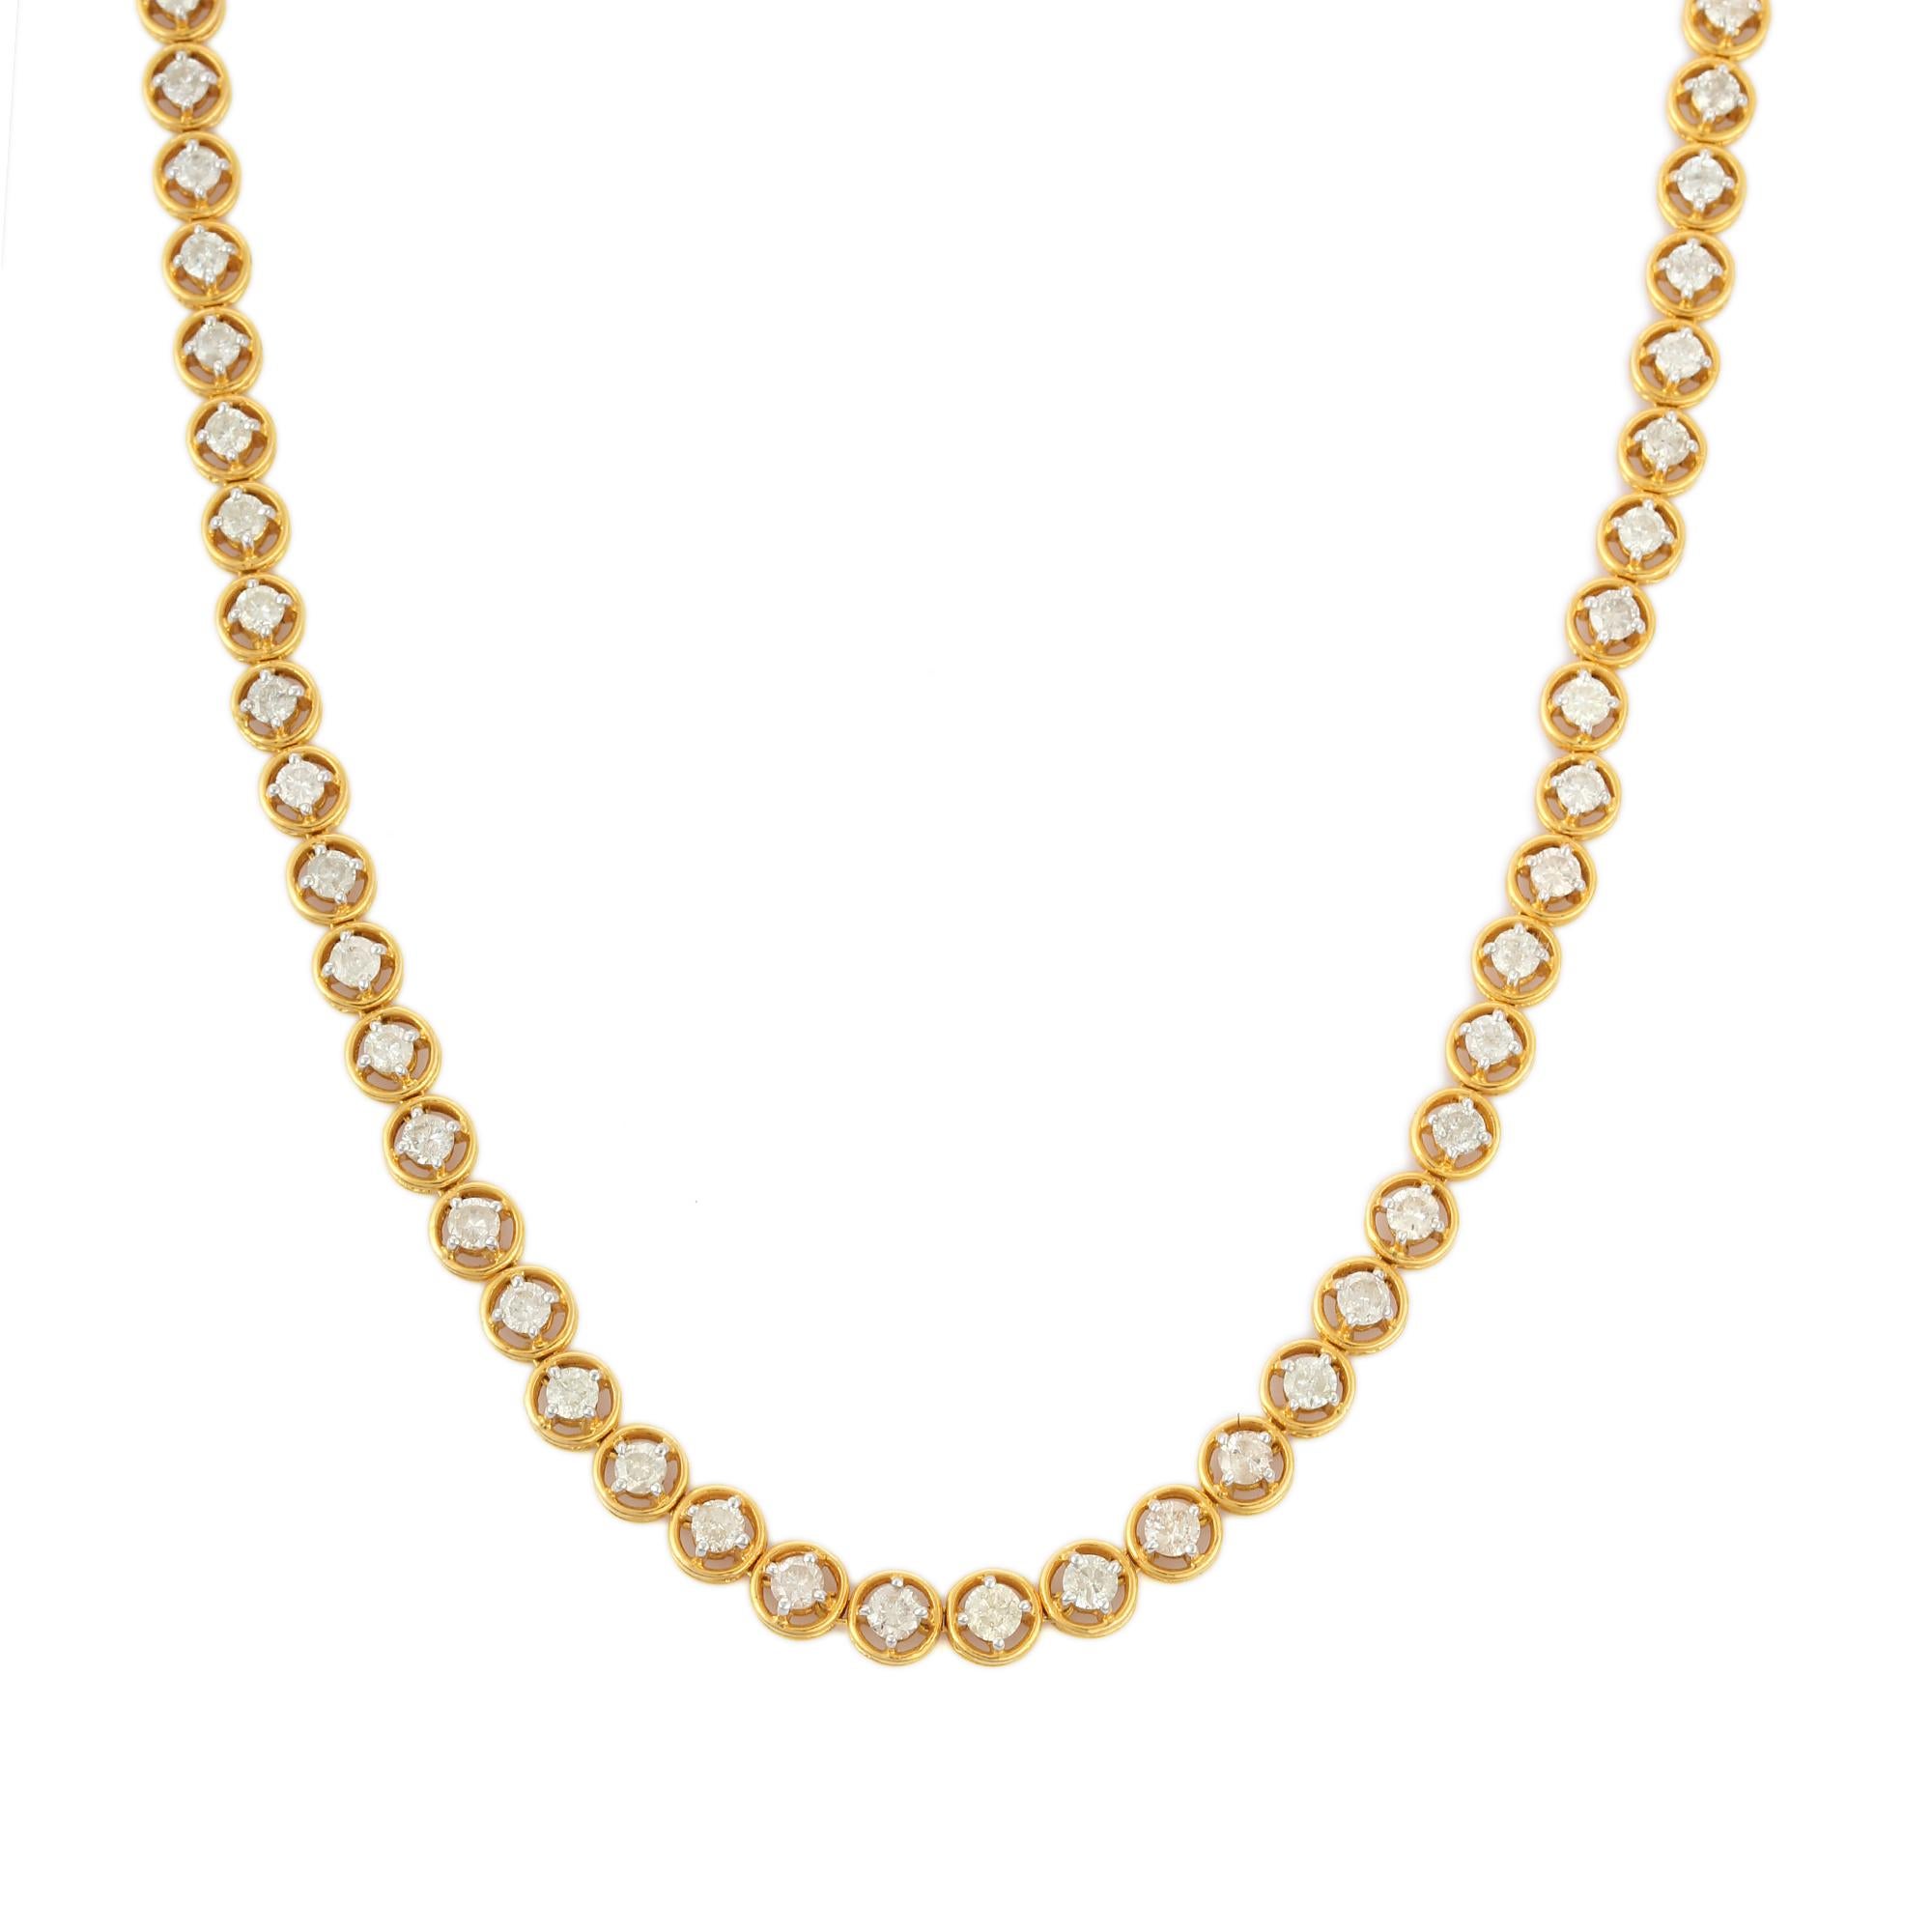 Round Cut Authentic 6.7 Carat Diamond Tennis Necklace in 18K Solid Yellow Gold For Sale